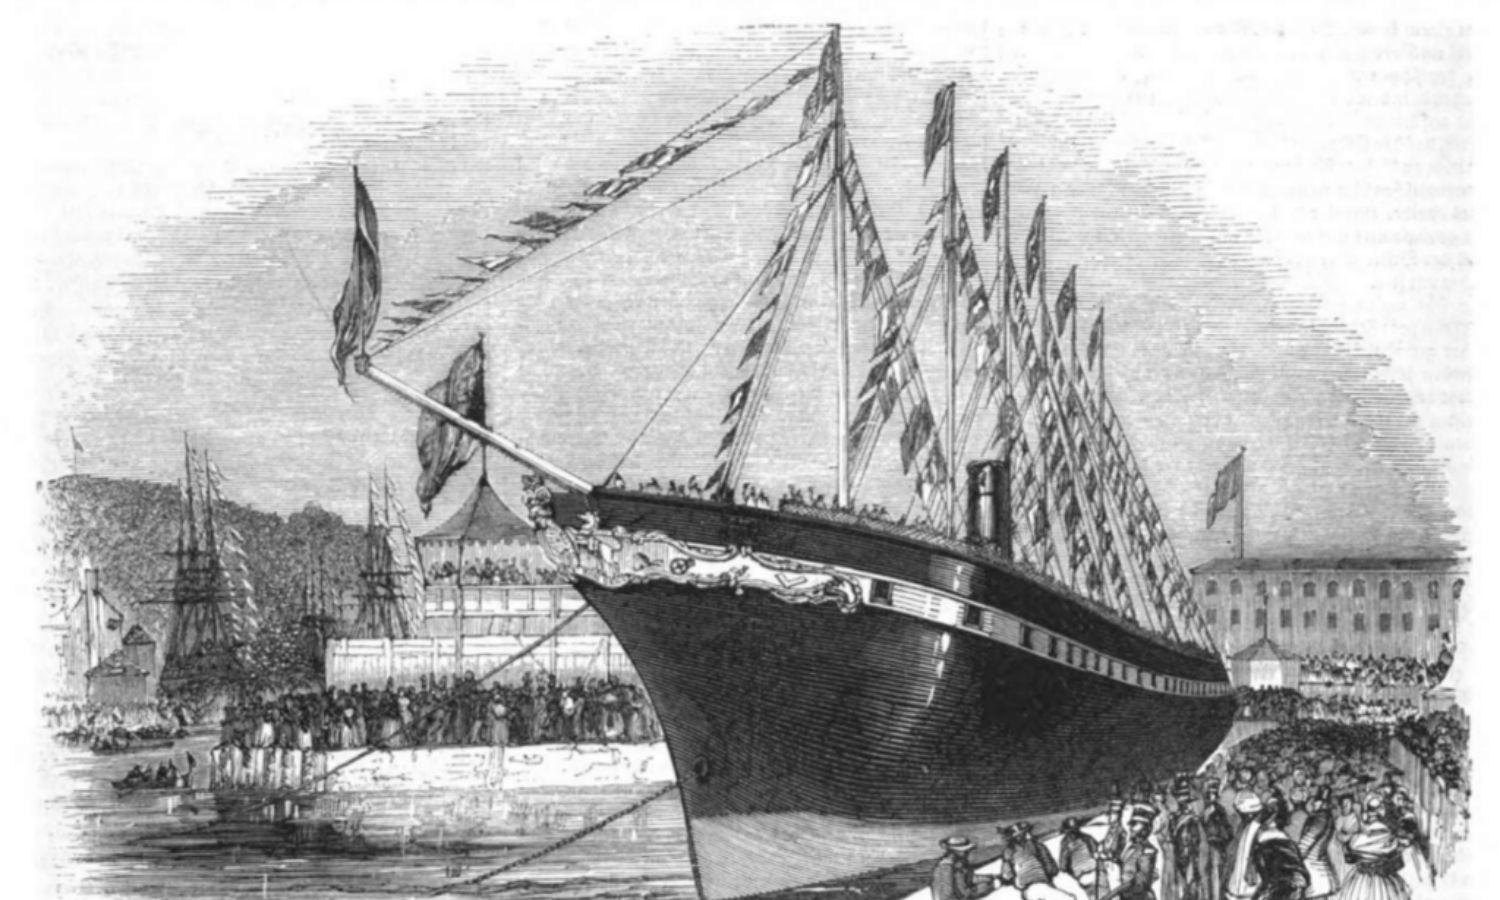 OTD in 1843: Brunel's SS Great Britain ship was launched after taking four years to build.